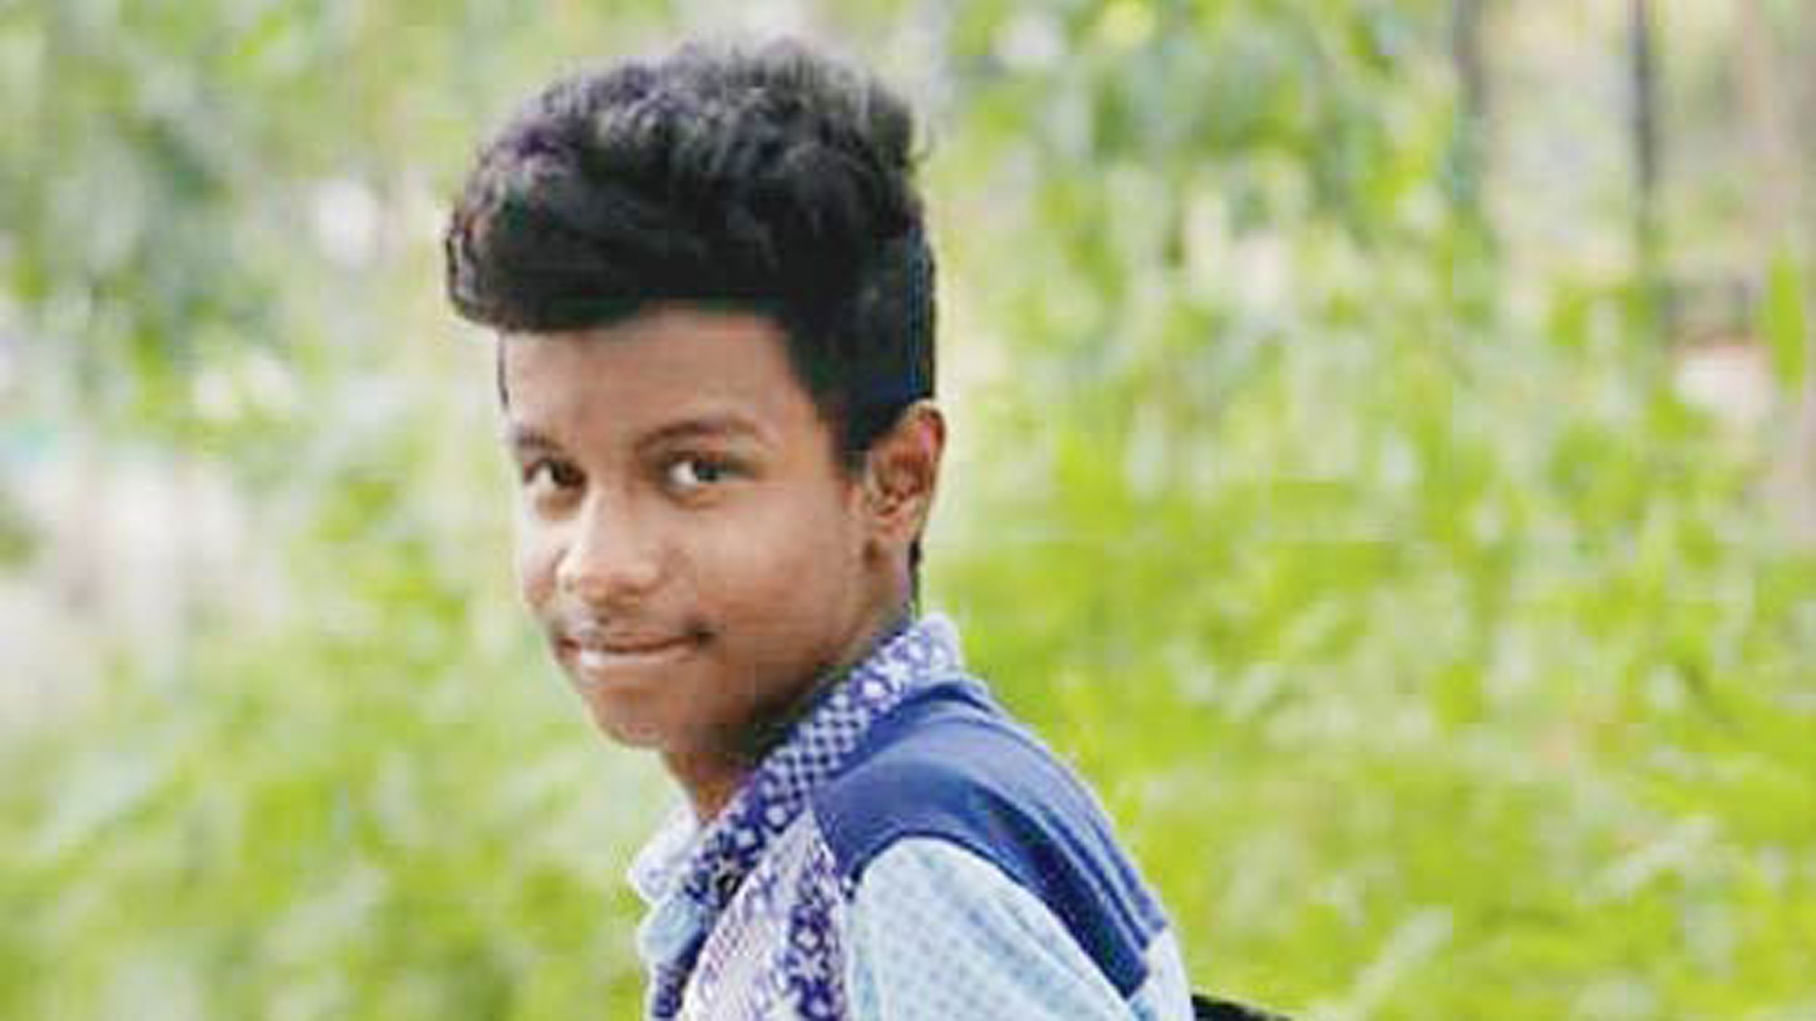 Swapnil Sonawane was to beaten to death by the family members of an upper caste girl who he loved. (Photo Courtesy: Facebook/<a href="https://www.facebook.com/photo.php?fbid=1081023975328739&amp;set=a.417698411661302.1073741825.100002634415312&amp;type=3&amp;theater">Vee J Veo Shankar</a>)